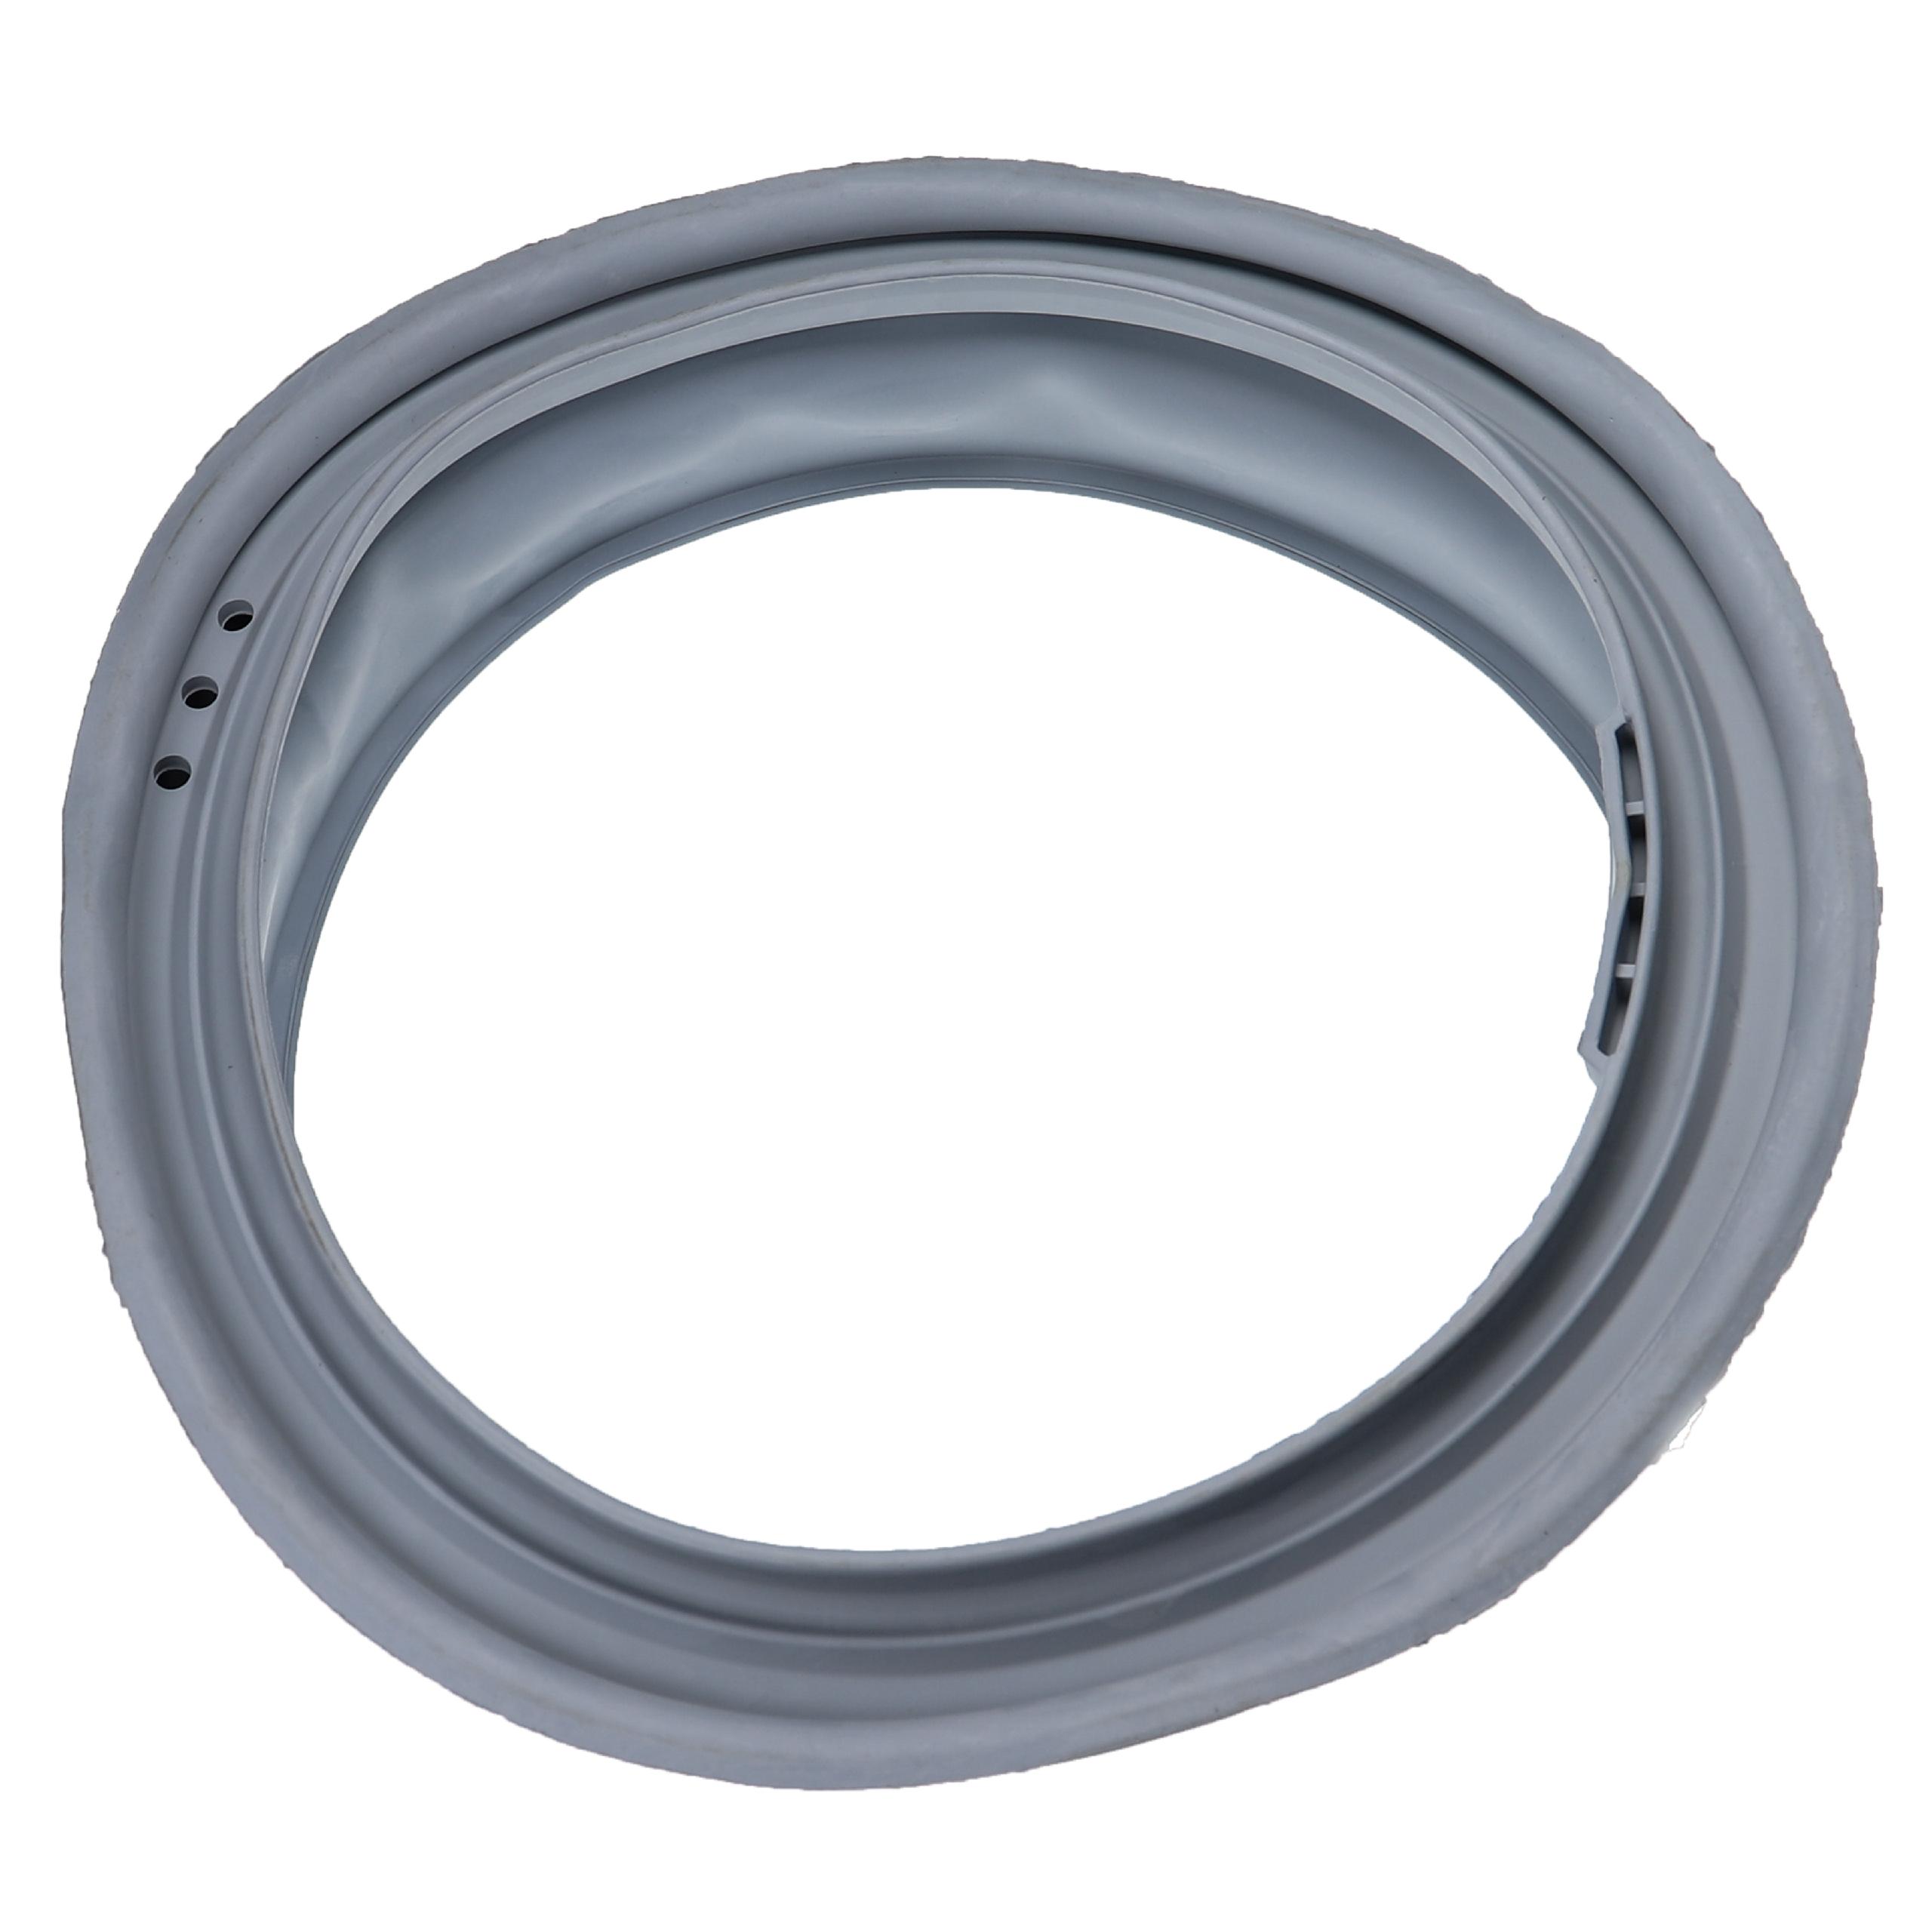 Door Seal replaces 00361127 for Washing Machine